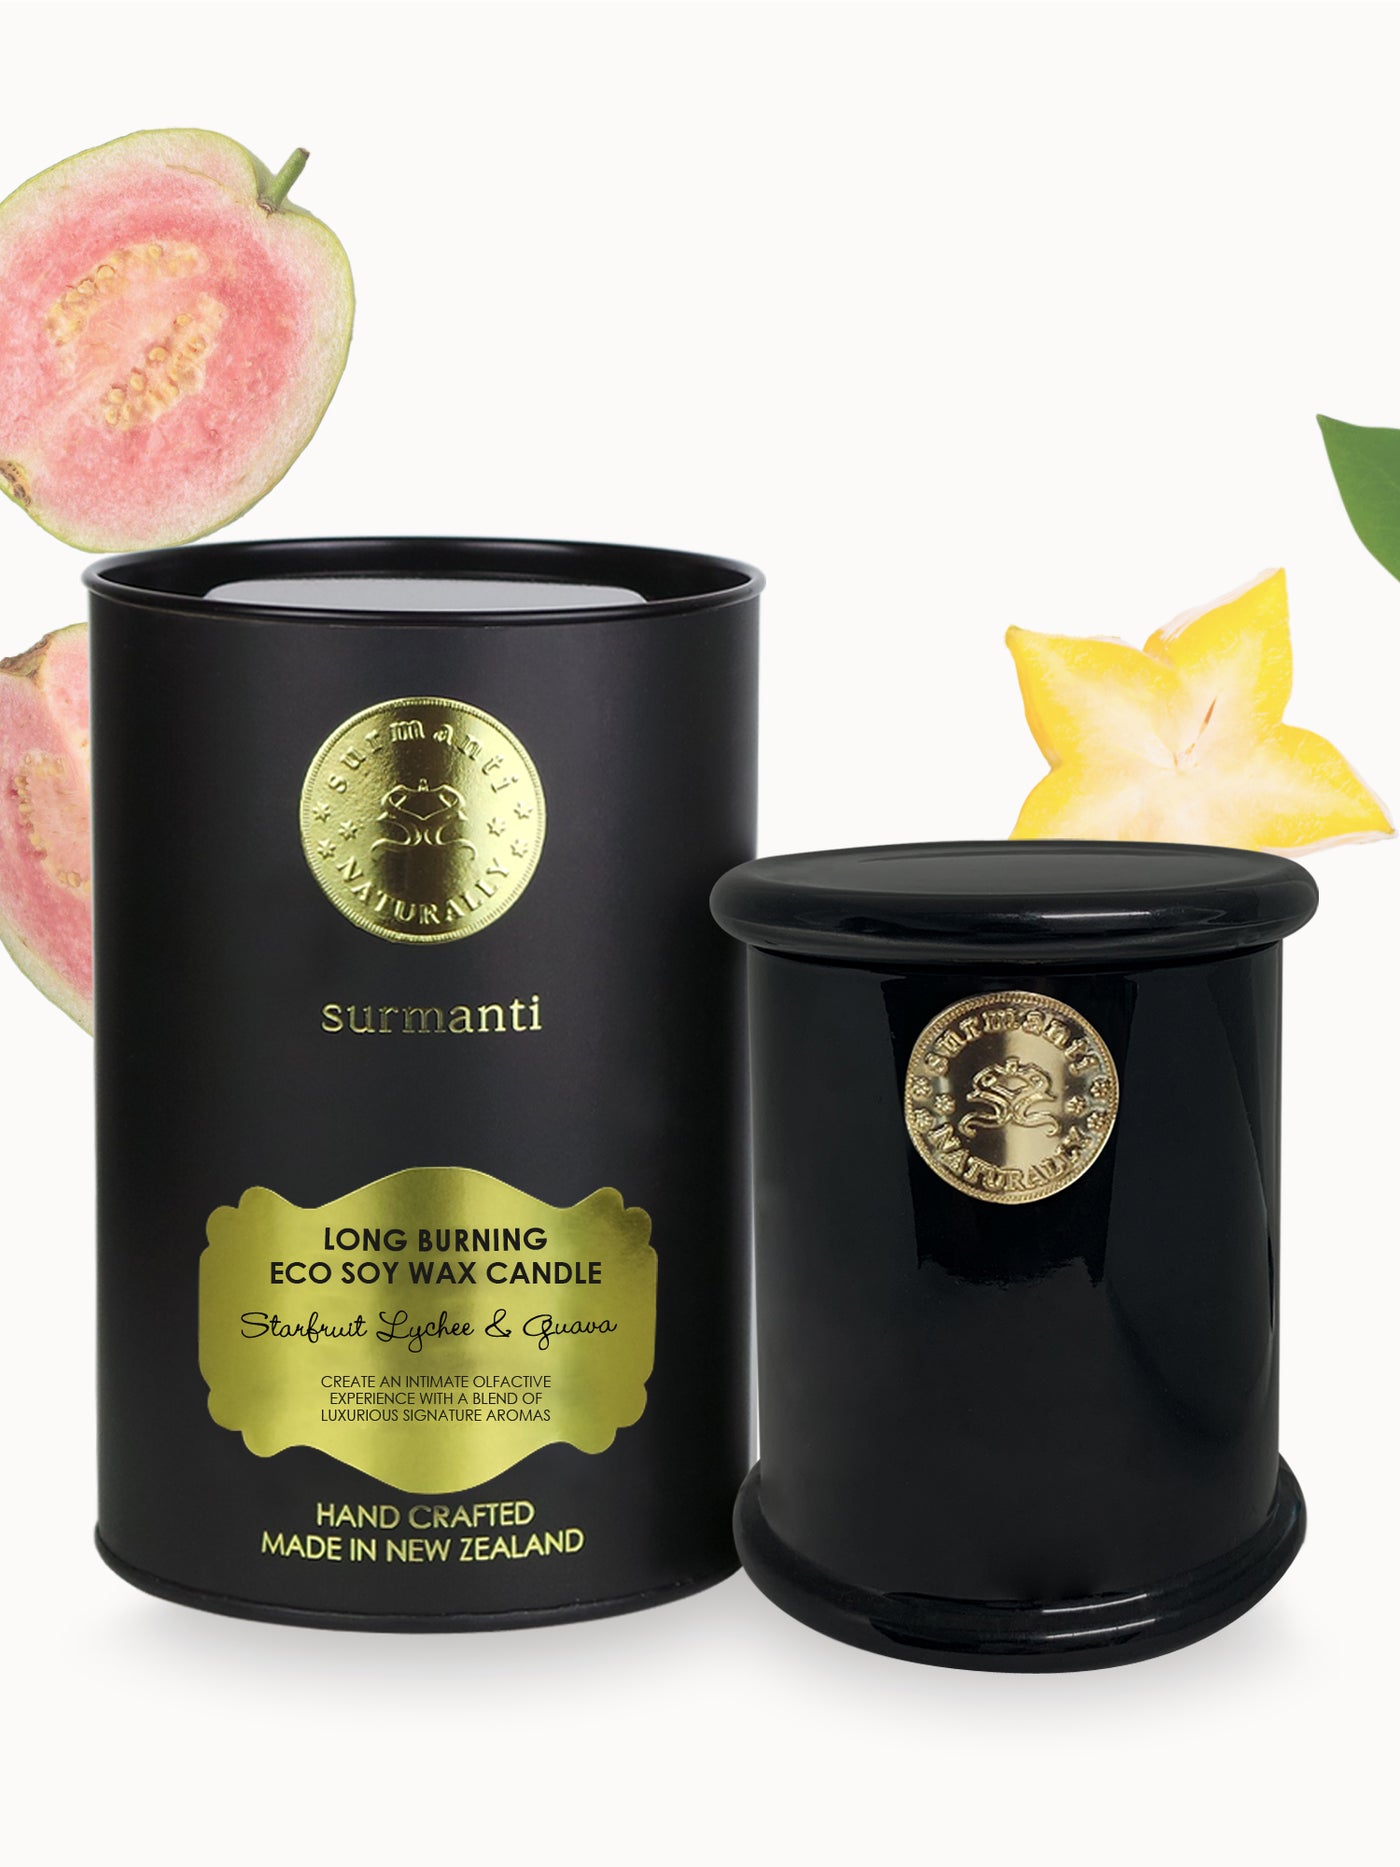 Starfruit Lychee & Guava Long Burning Eco Soy Wax Candle - Surmanti - Made In New Zealand